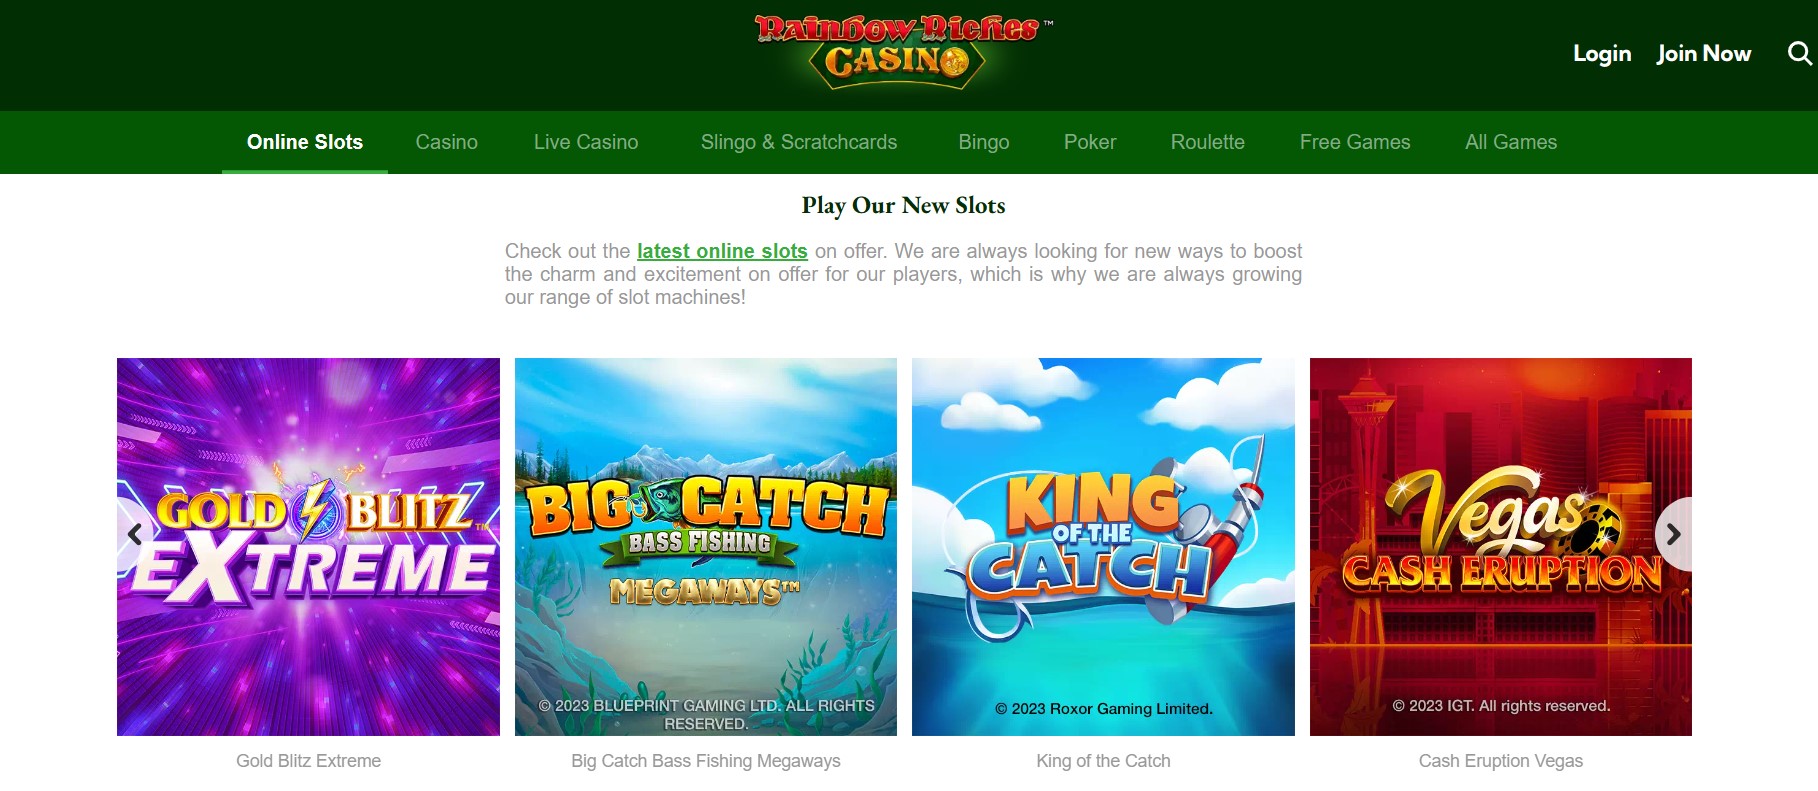 Rainbow Riches Casino Games Review